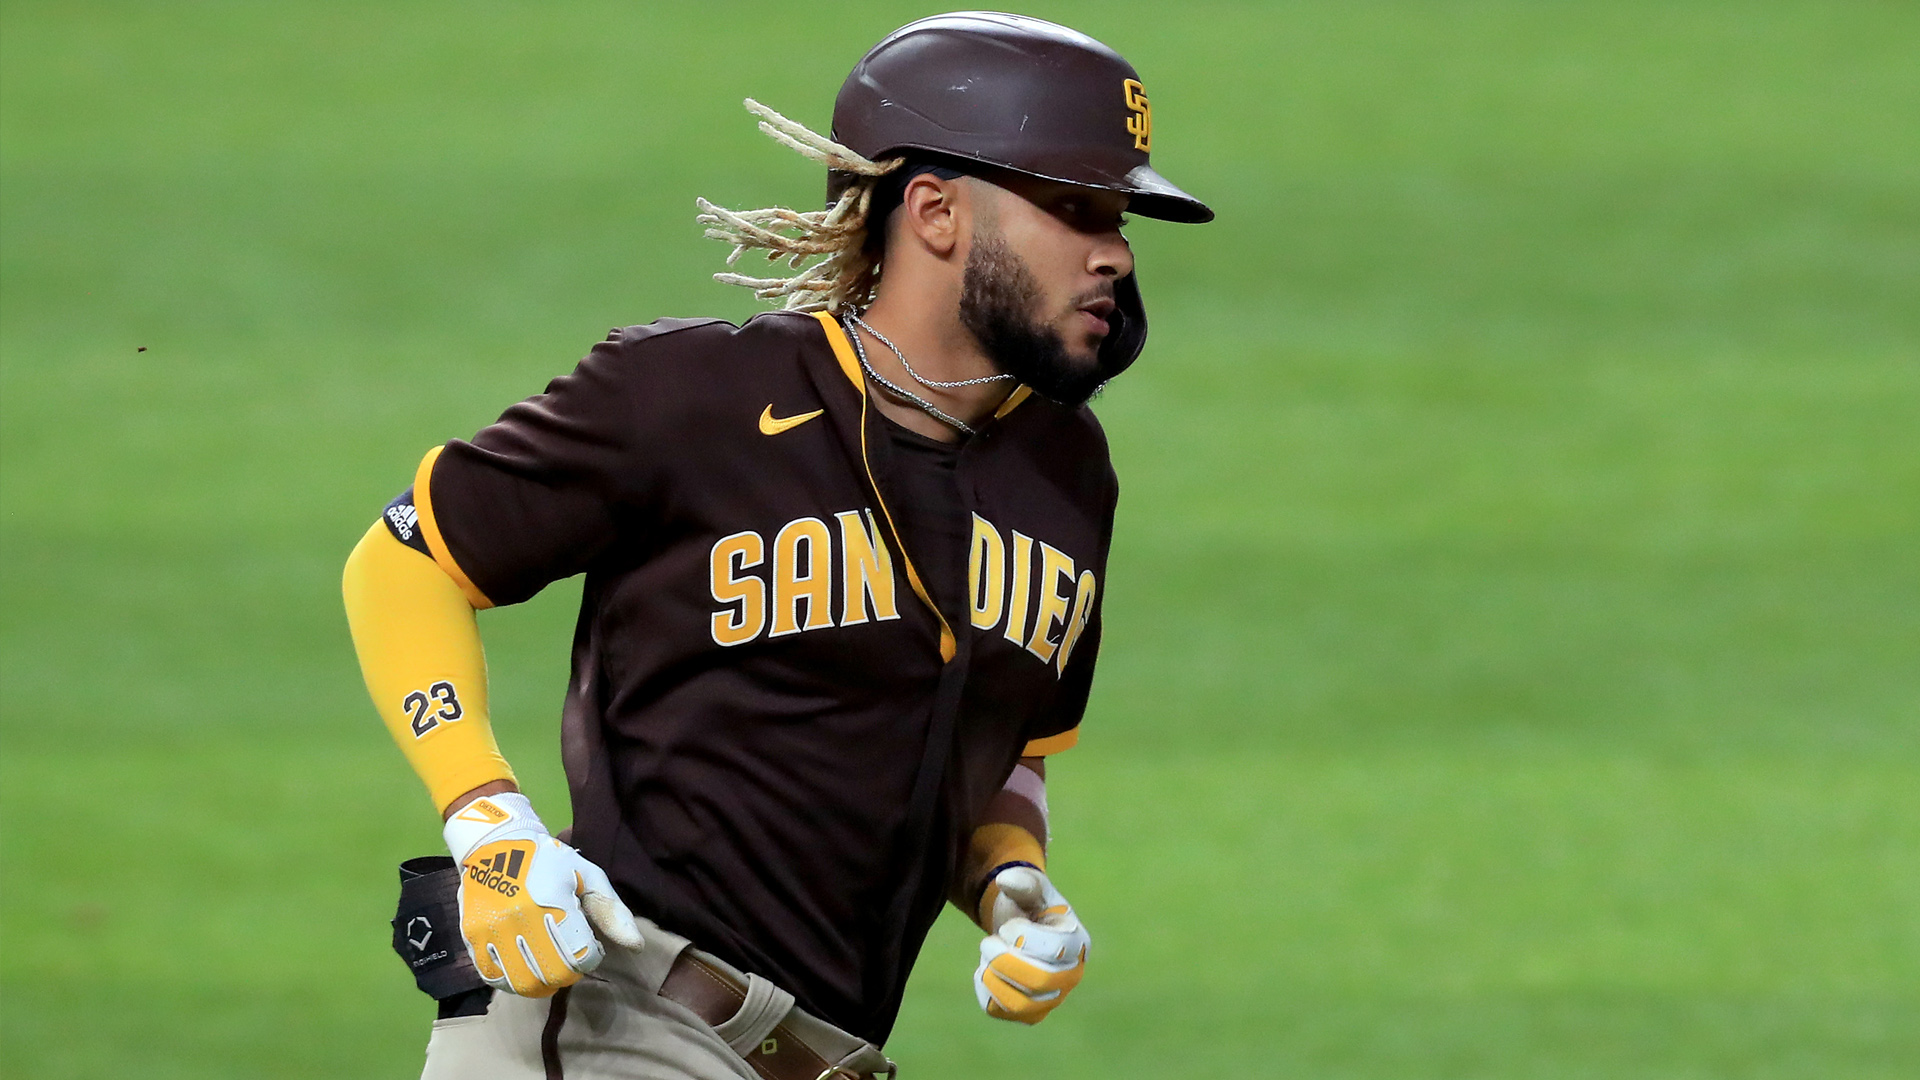 Padres unhappy Giants broke one of baseball's unwritten rules